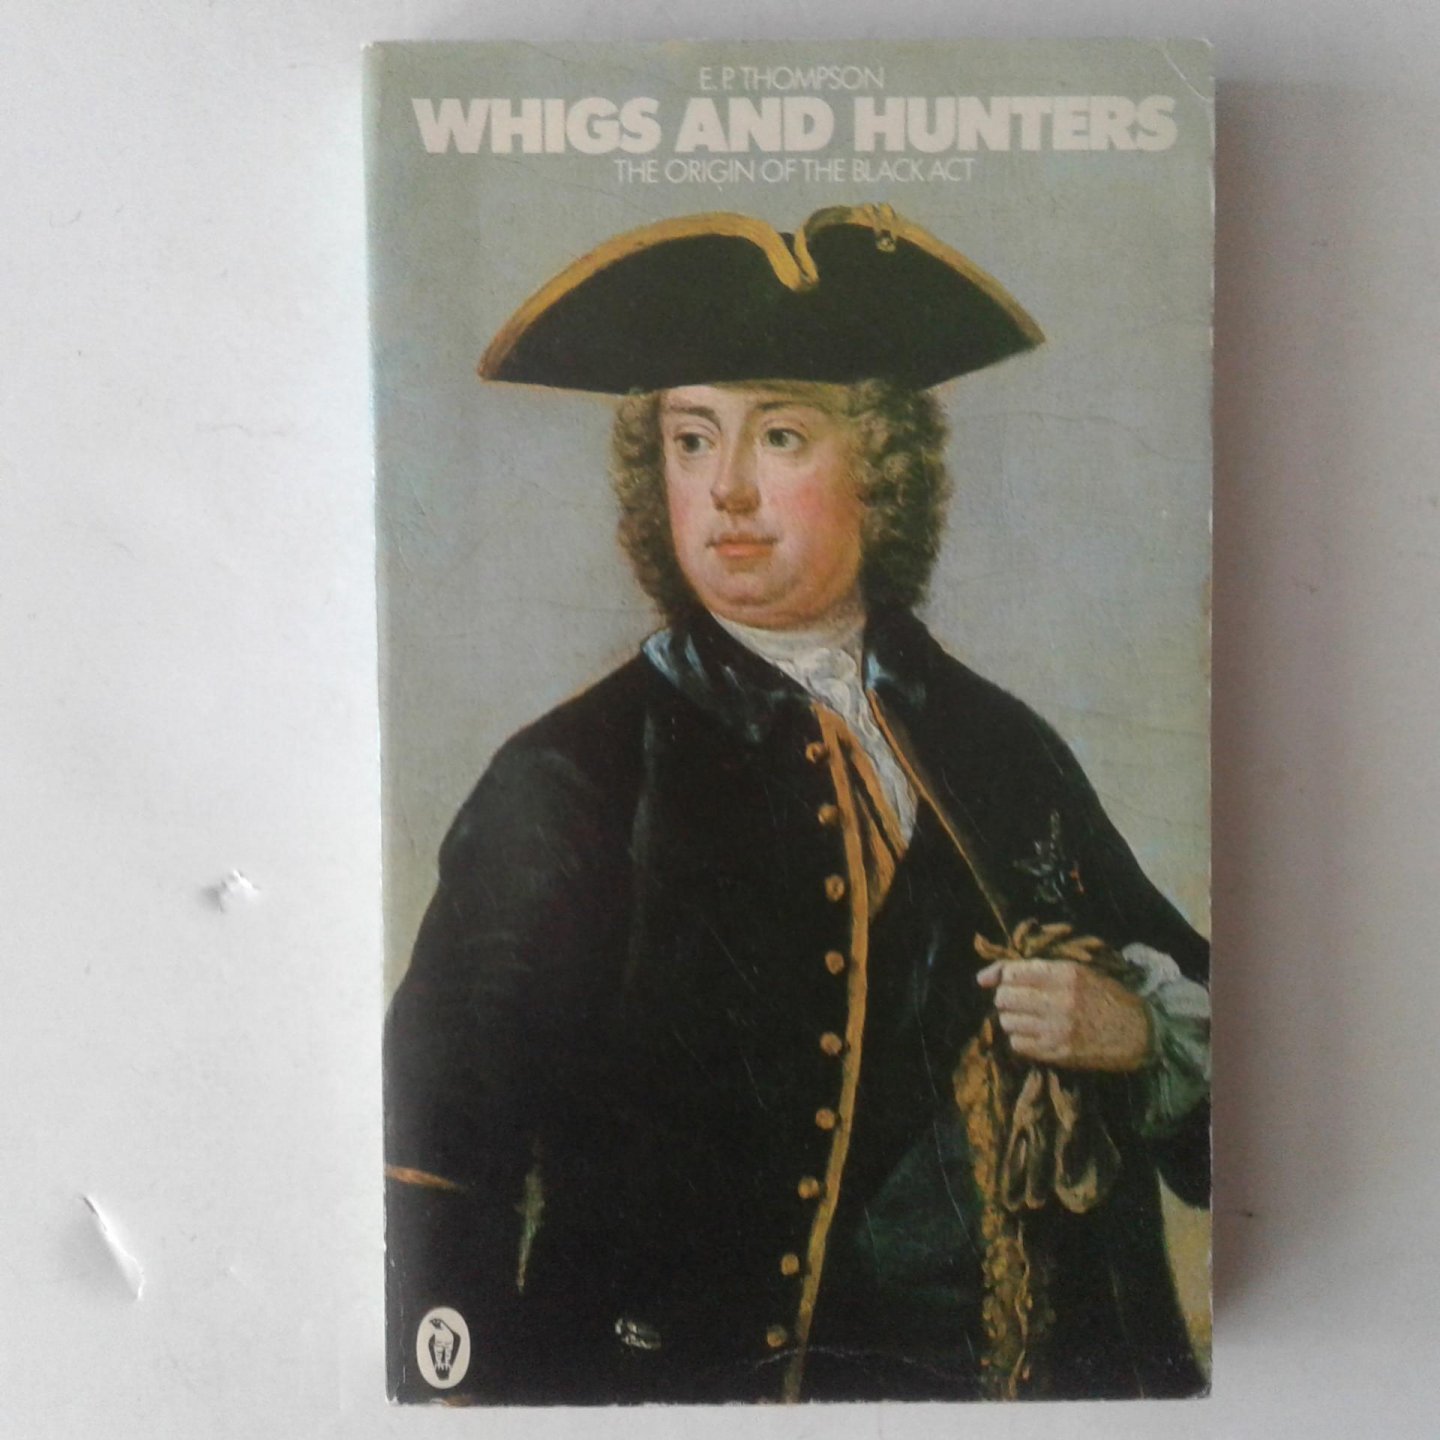 Thompson, E.P. - Whigs and Hunters ; The Origin of Black Act